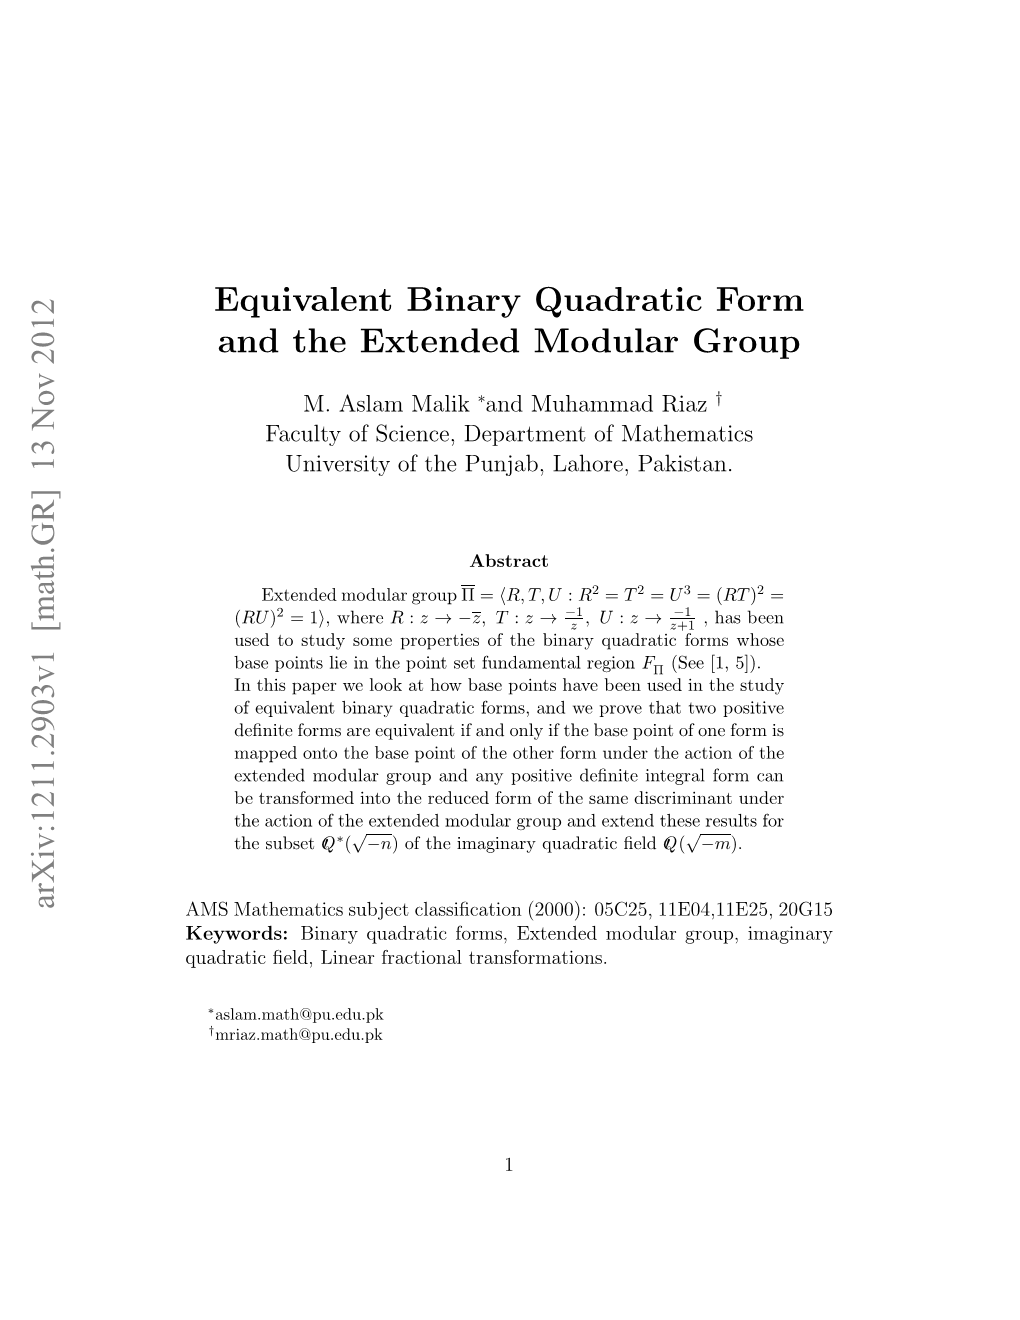 Equivalent Binary Quadratic Form and the Extended Modular Group